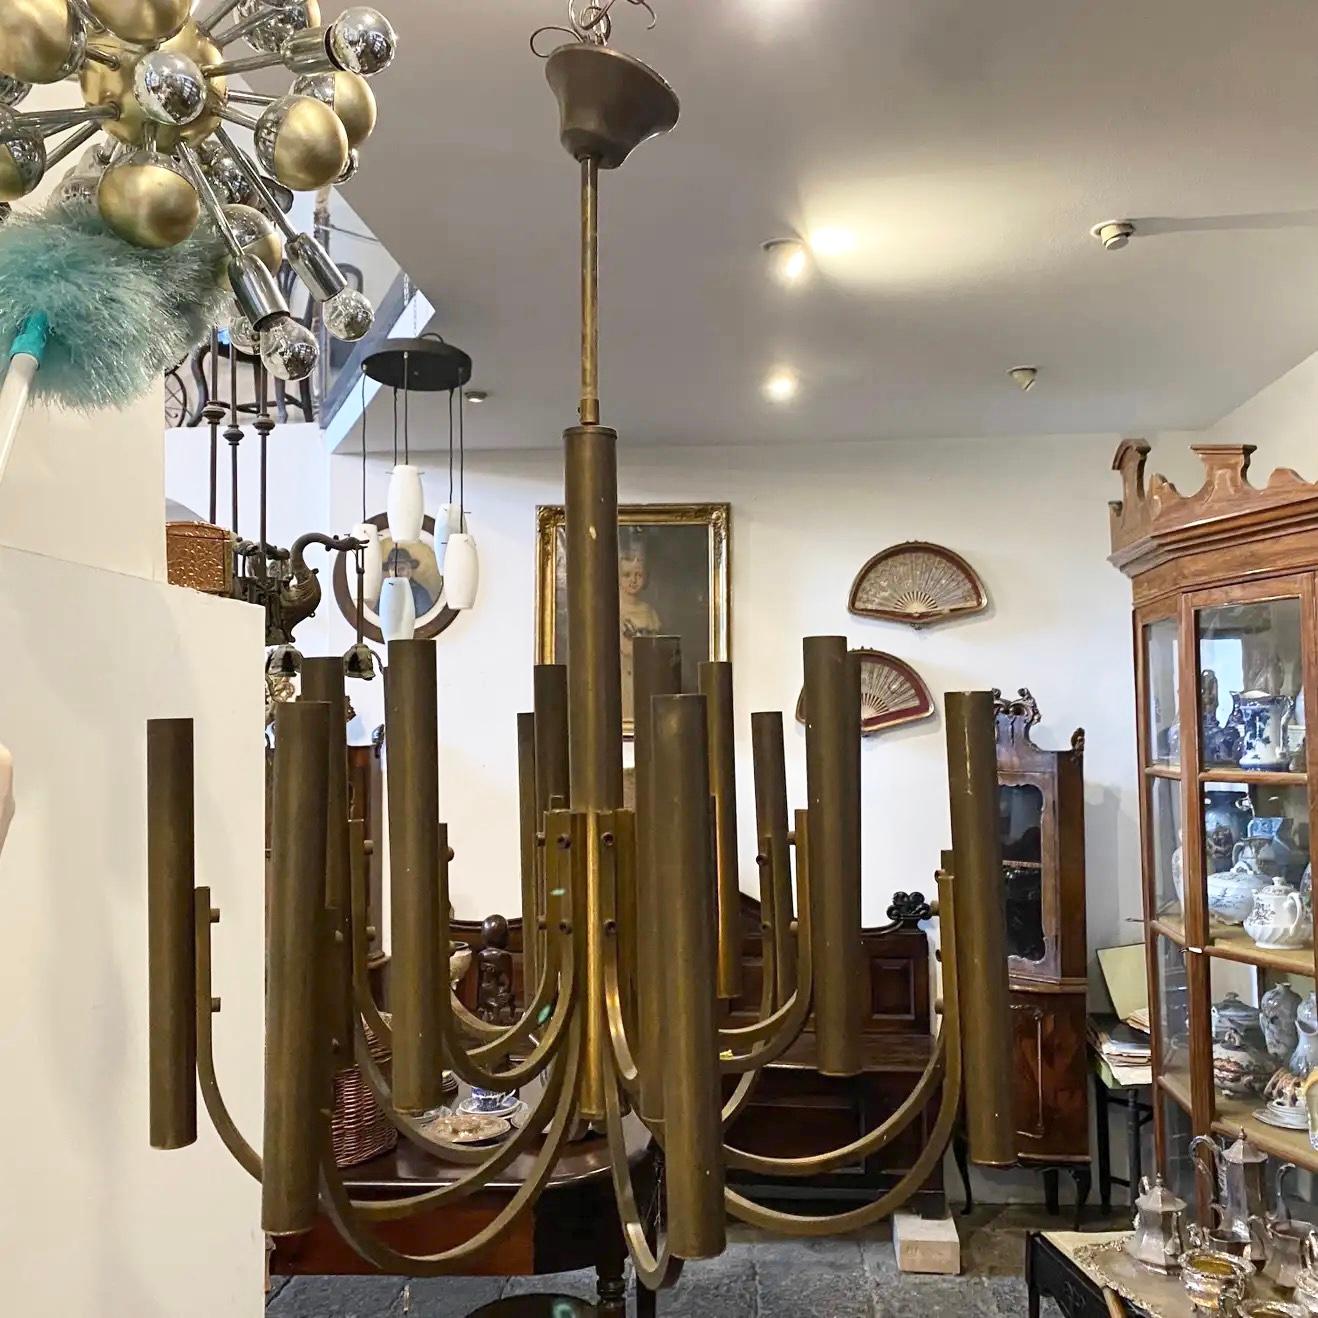 A brass Mid-Century Modern chandelier designed by Gaetano Sciolari and manufactured in Italy. It works both 110-240 volts and needs regular e14 bulbs, brass it's in original patina.